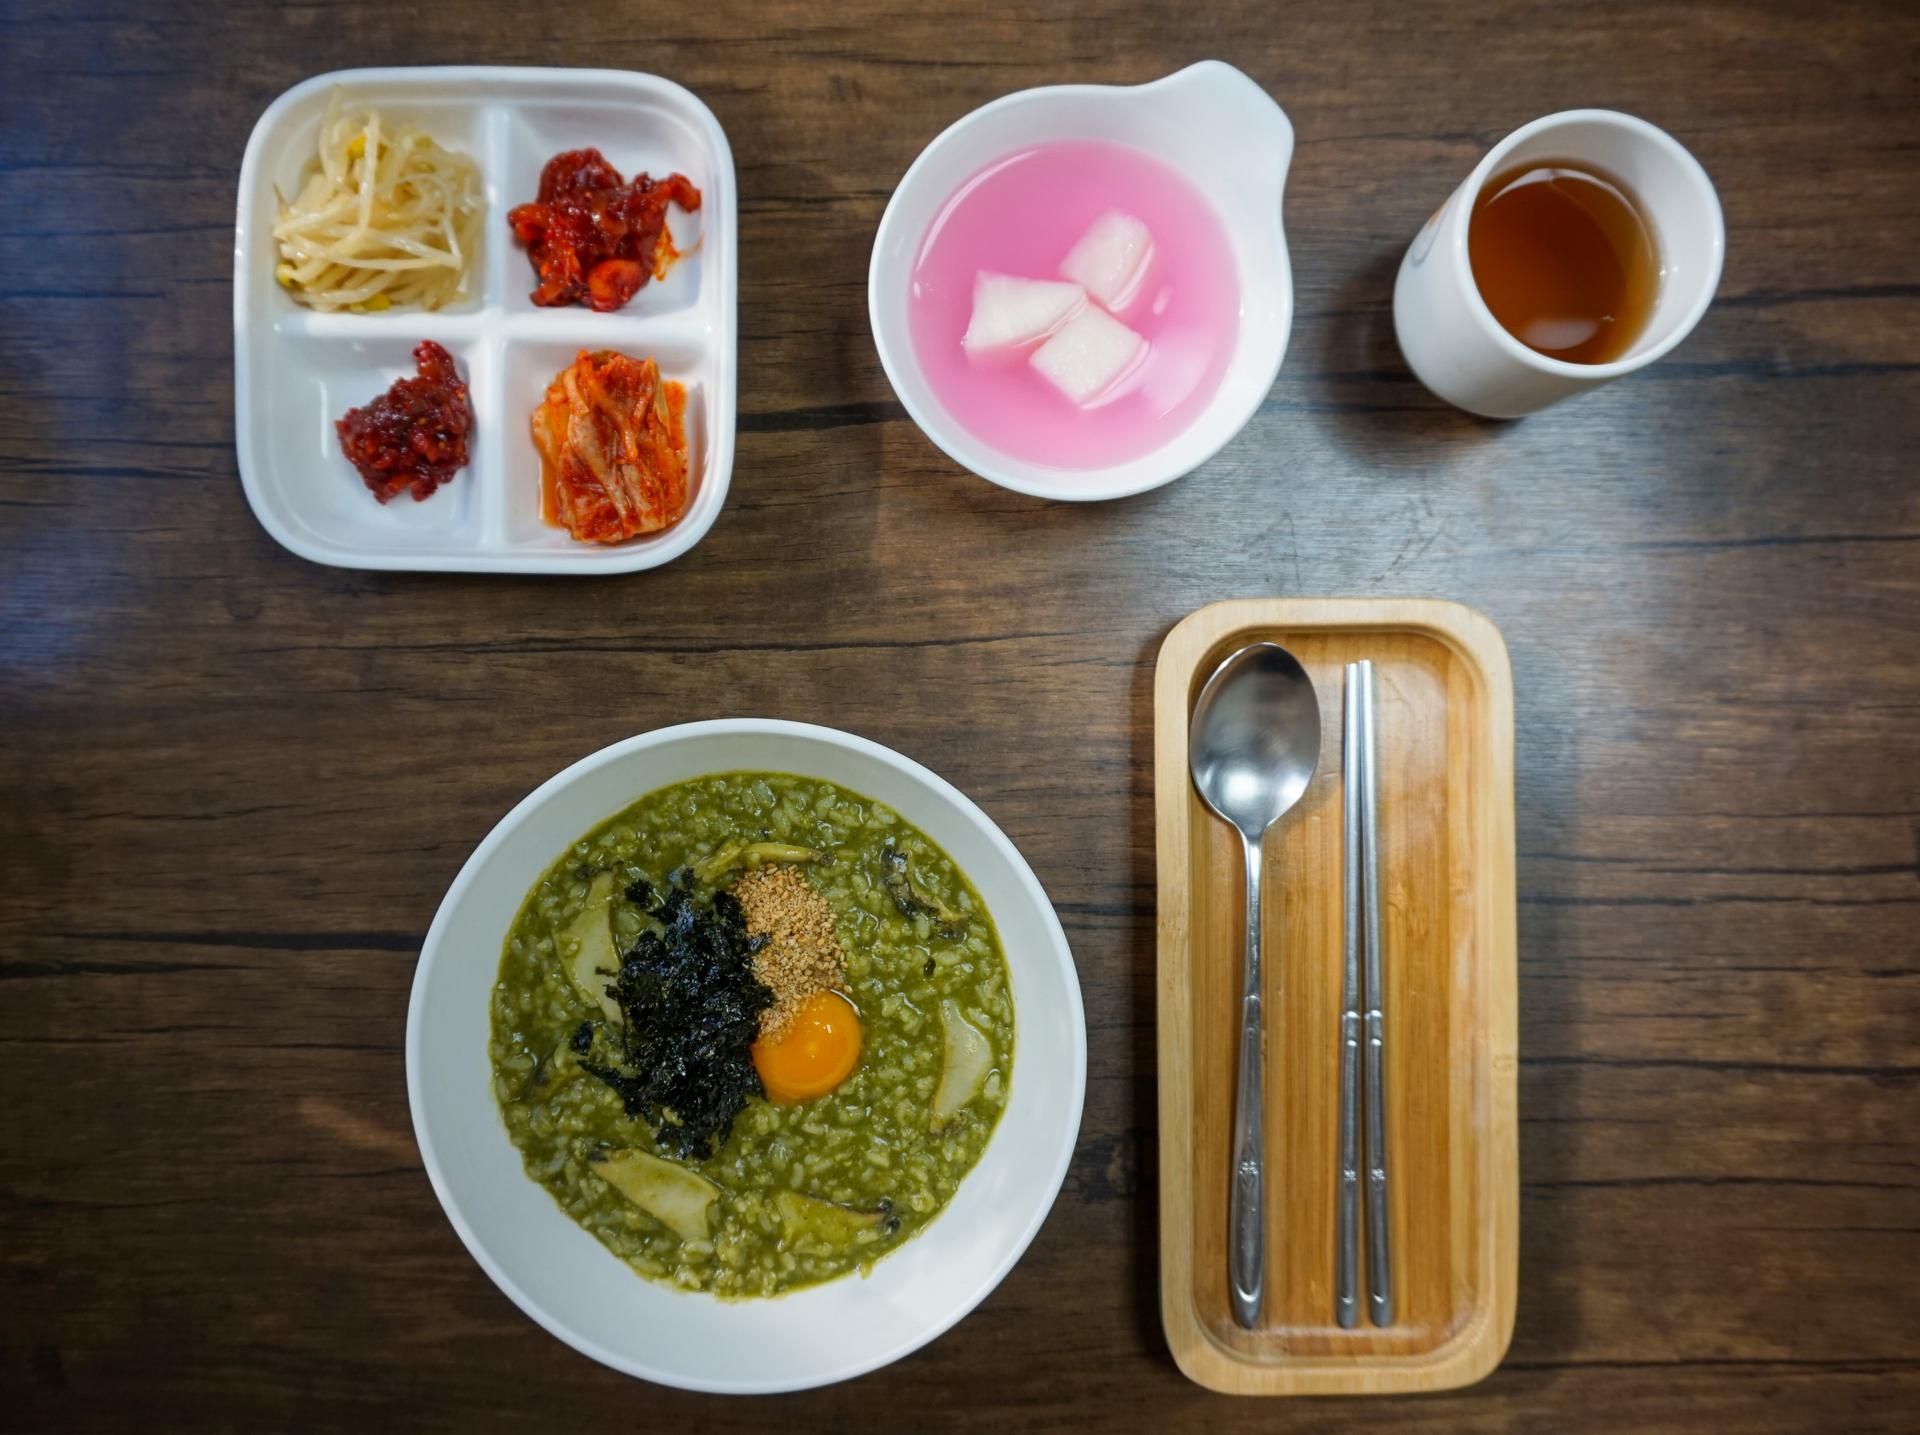 Tableware with dishes and ingredients including broccoli, served in a Korean cuisine restaurant.